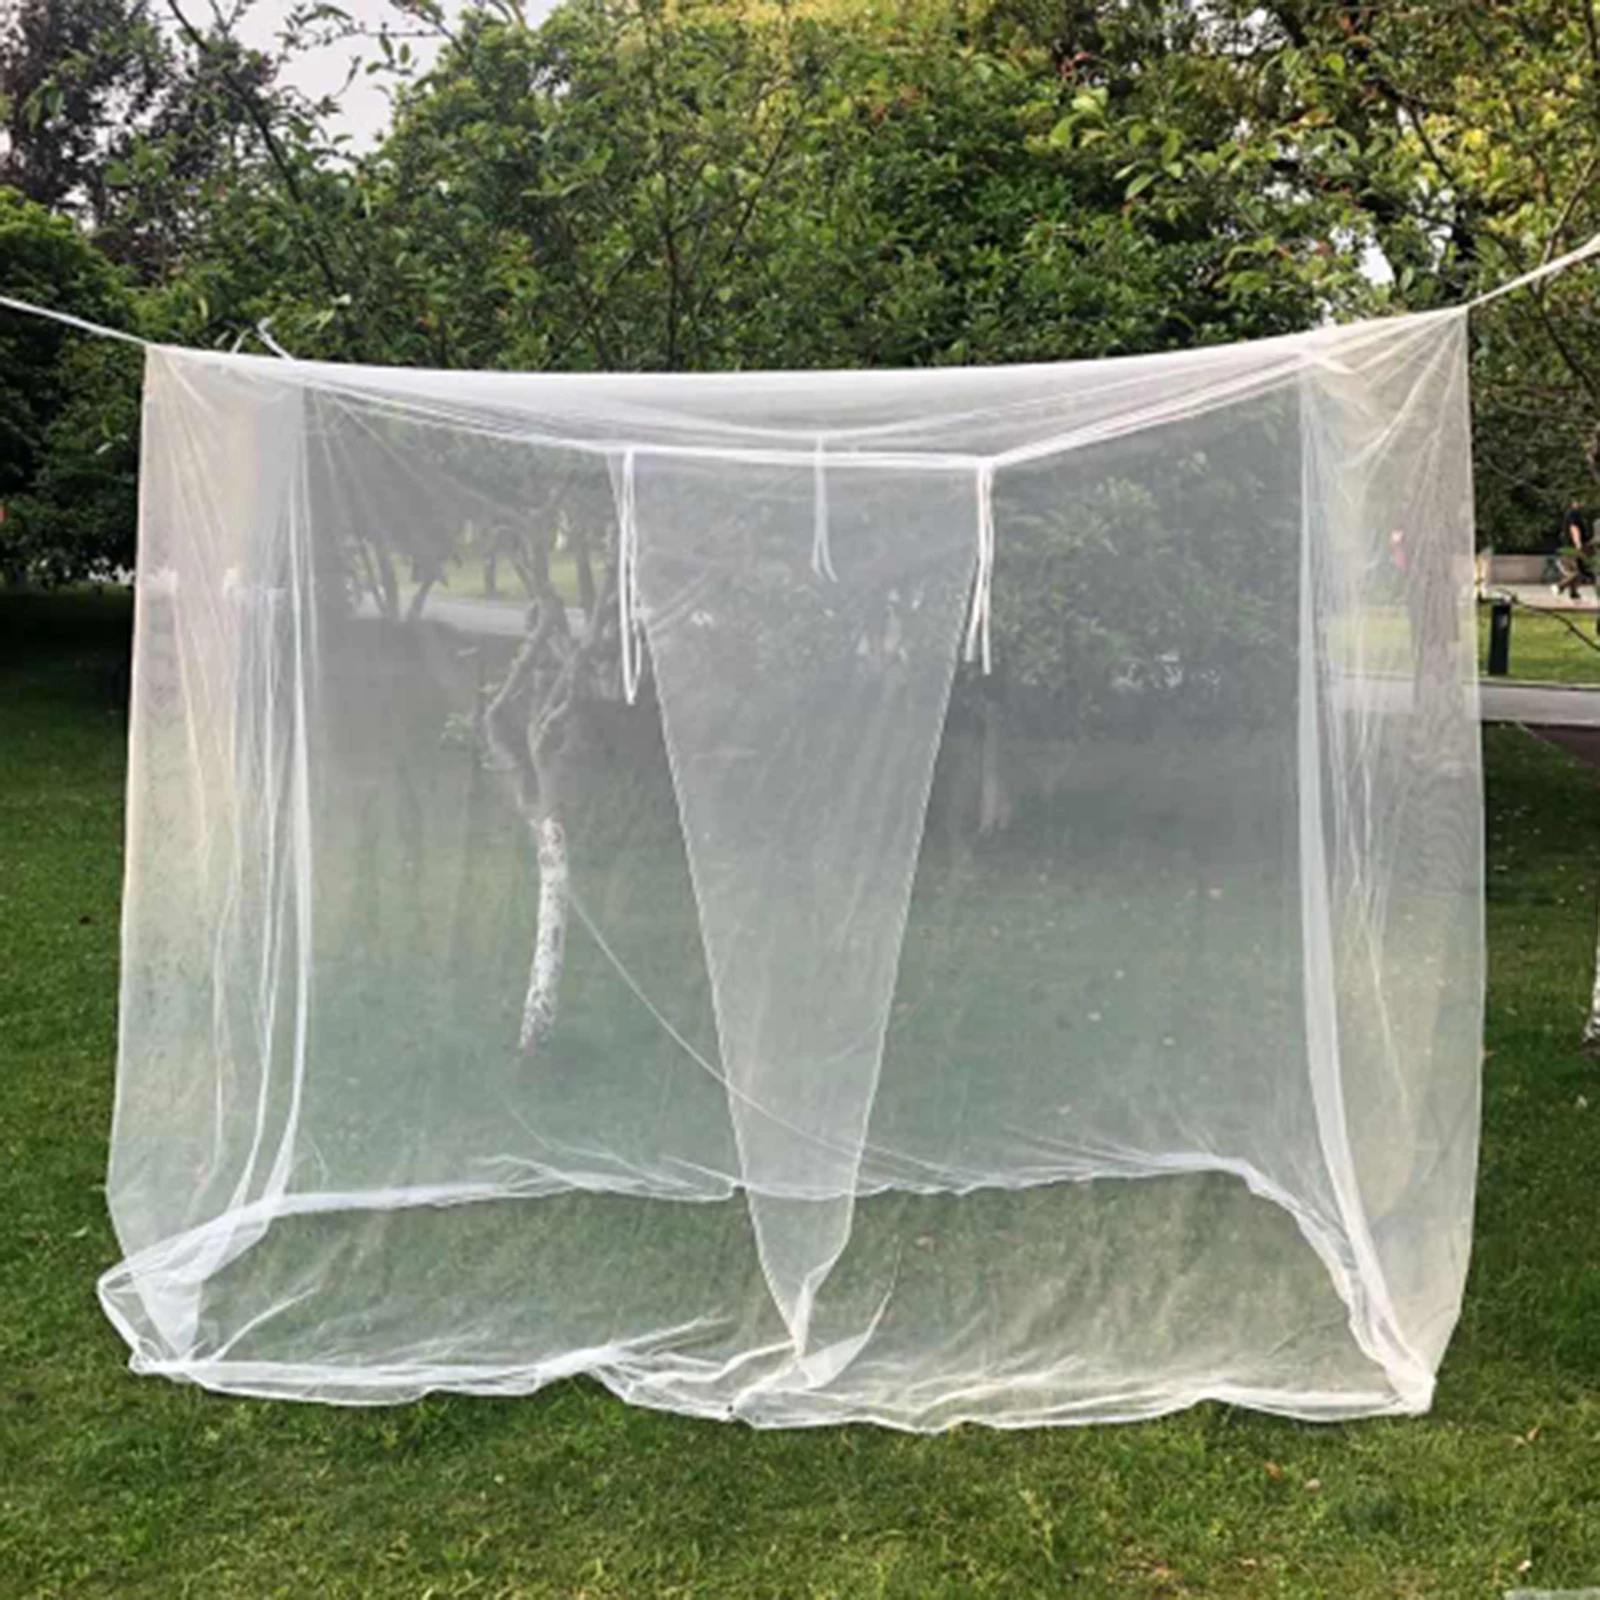 Mosquito Net White Large Outdoors Camping Netting Tent Canopy 200x200x180cm